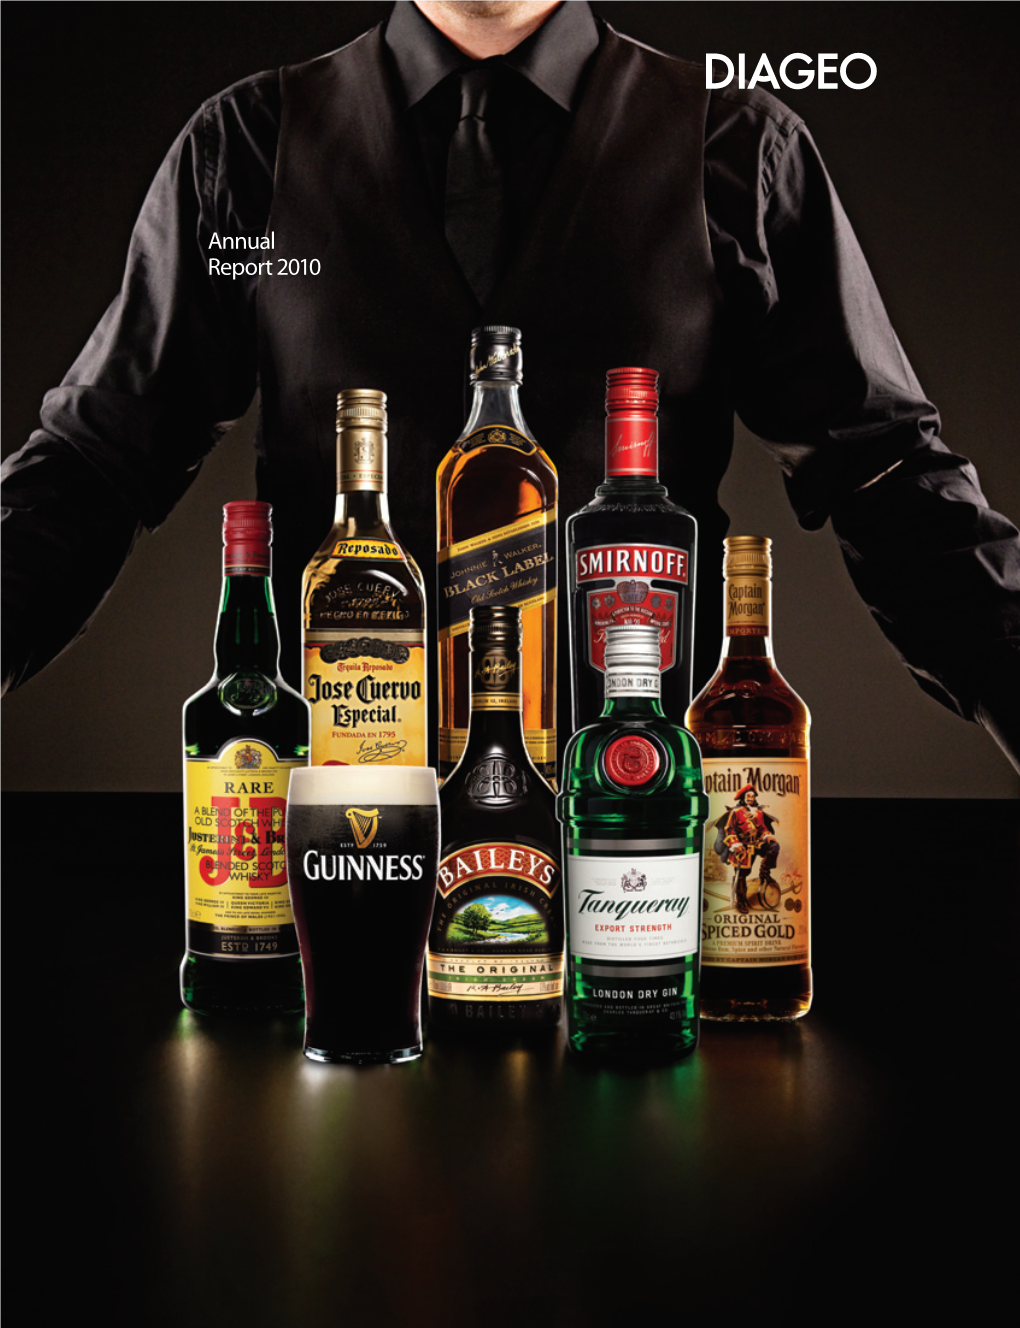 Annual Report 2010 About Diageo 2010 Was Characterised Diageo Plc Is the World’S Leading Premium Drinks Business with an Outstanding Collection by Variability